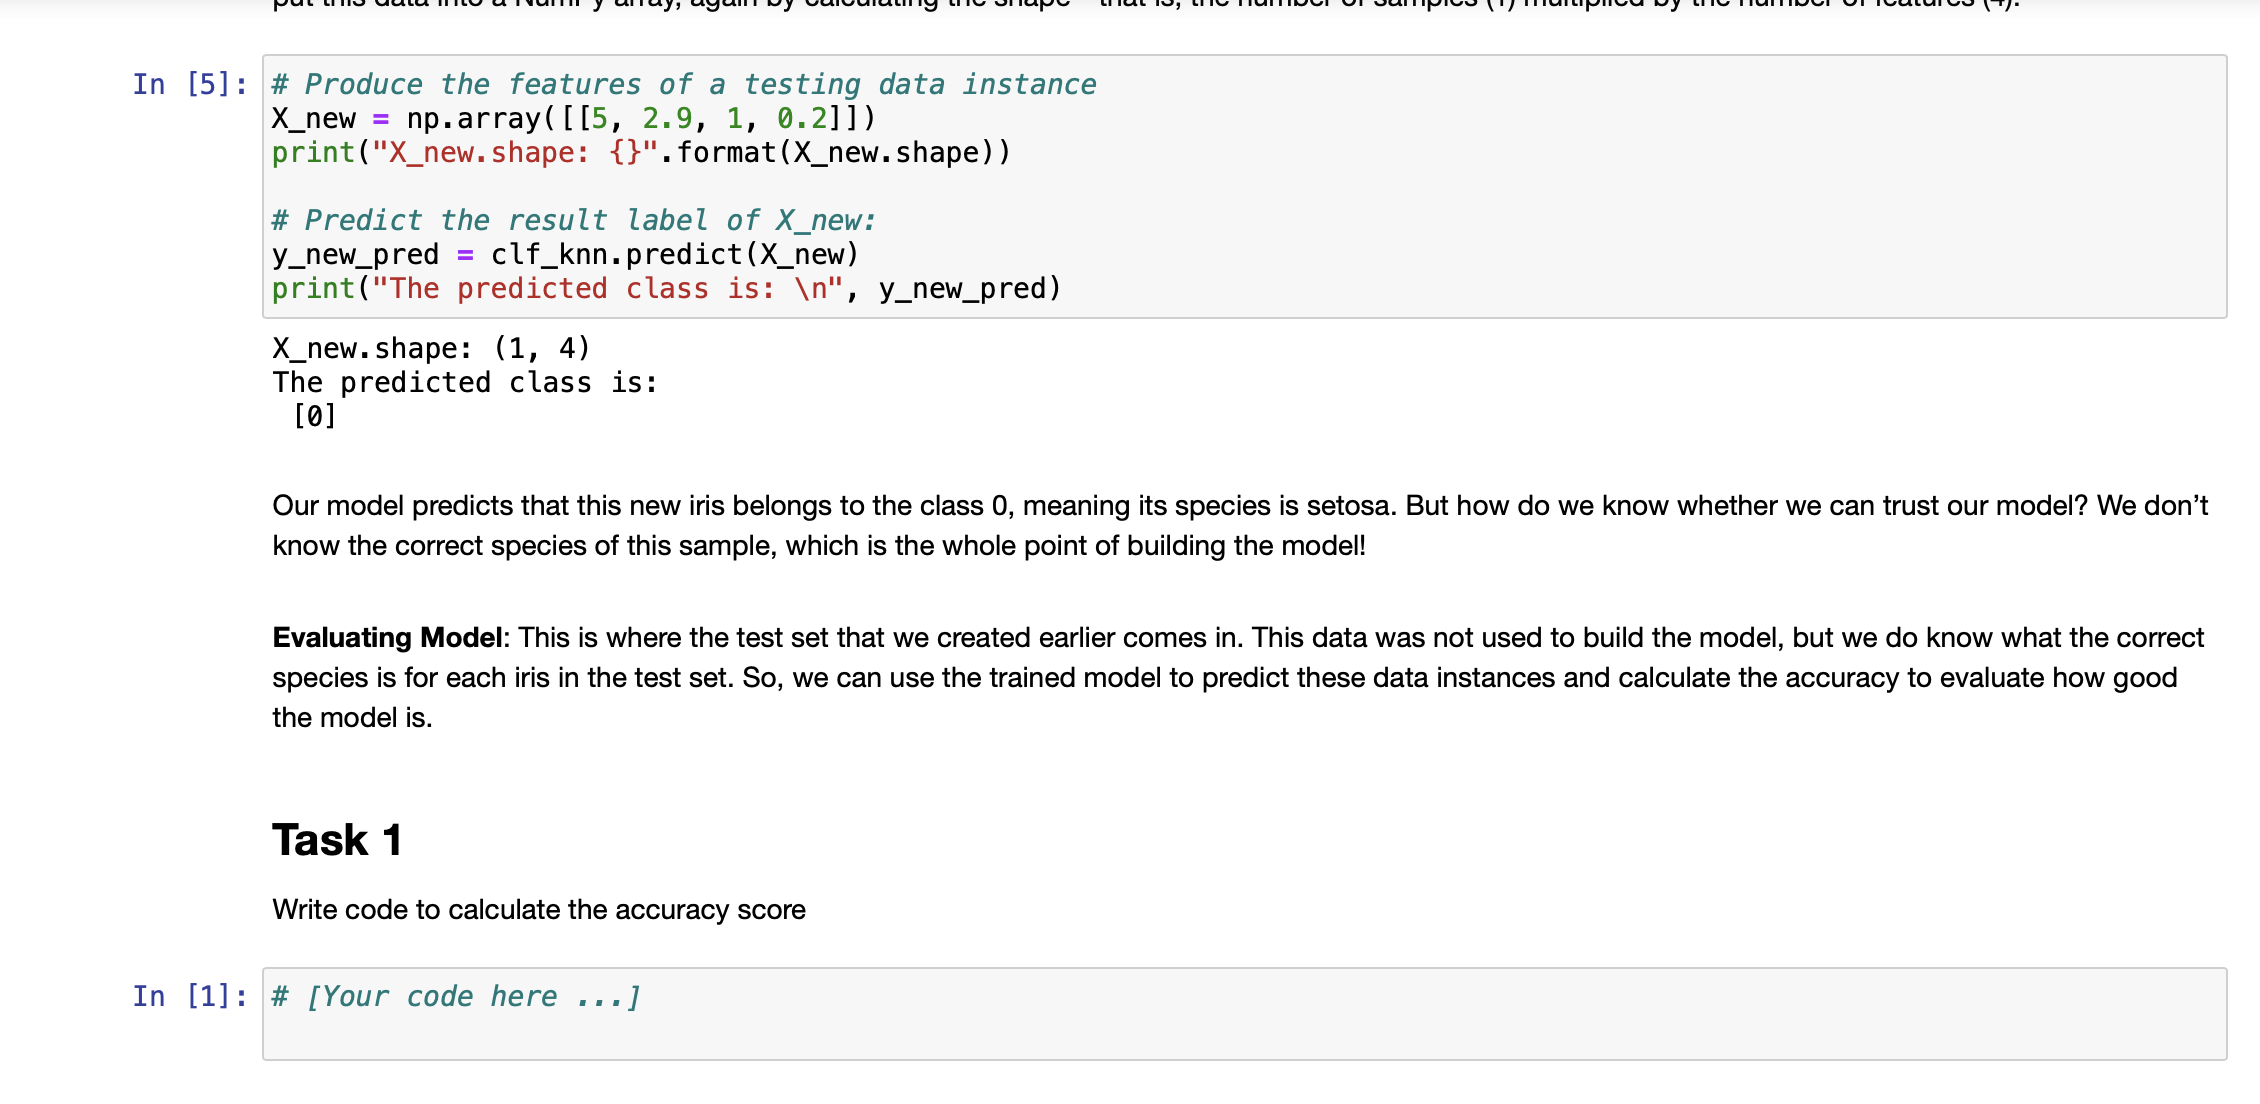 In [5]: # Produce the features of a testing data instance X_new np.array([[5, 2.9, 1, 0.2]])